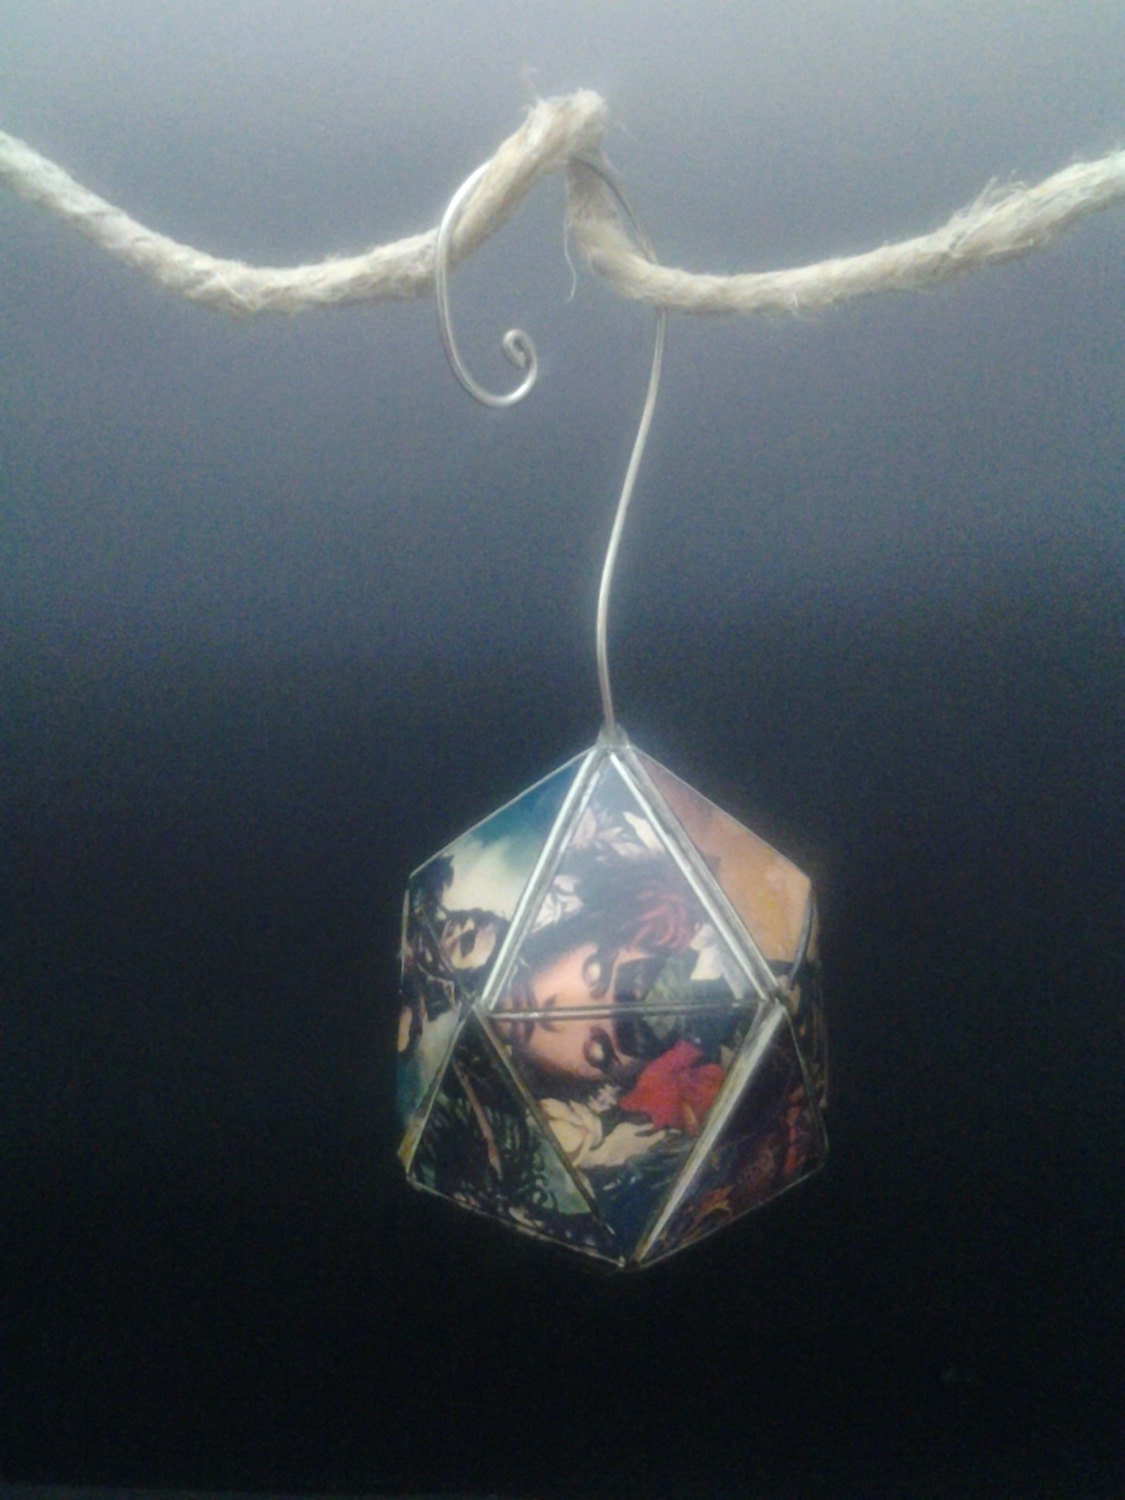 Mtg D20 Christmas Ornament made by hand out of Magic the Gathering cards, a lil' ink & printer paper, copper wire, some adhesives and a bit of time.